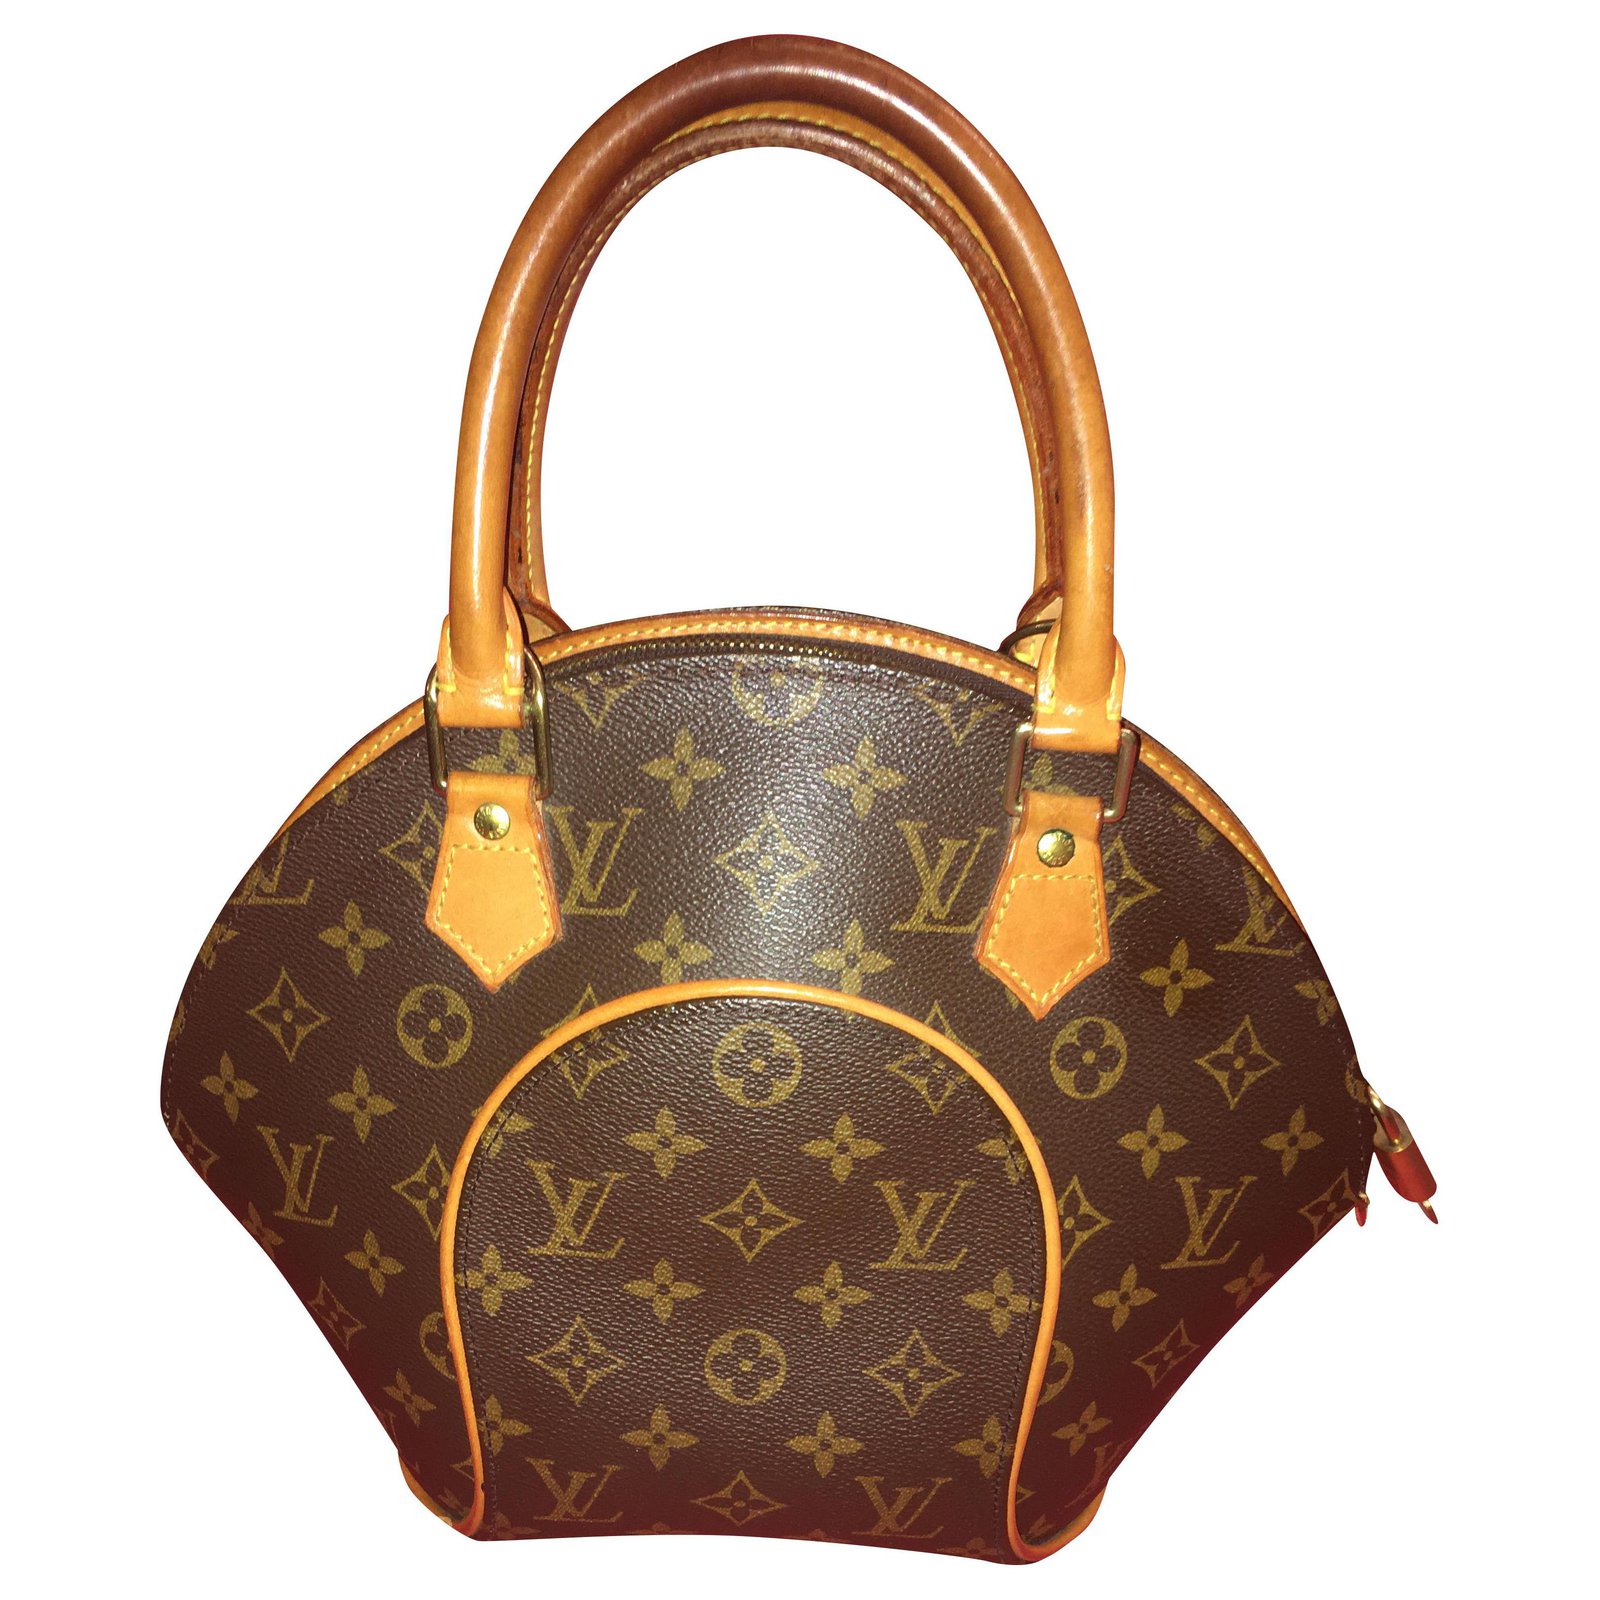 Louis Vuitton Handbag Purse in Brown Leather Early 2000s LV